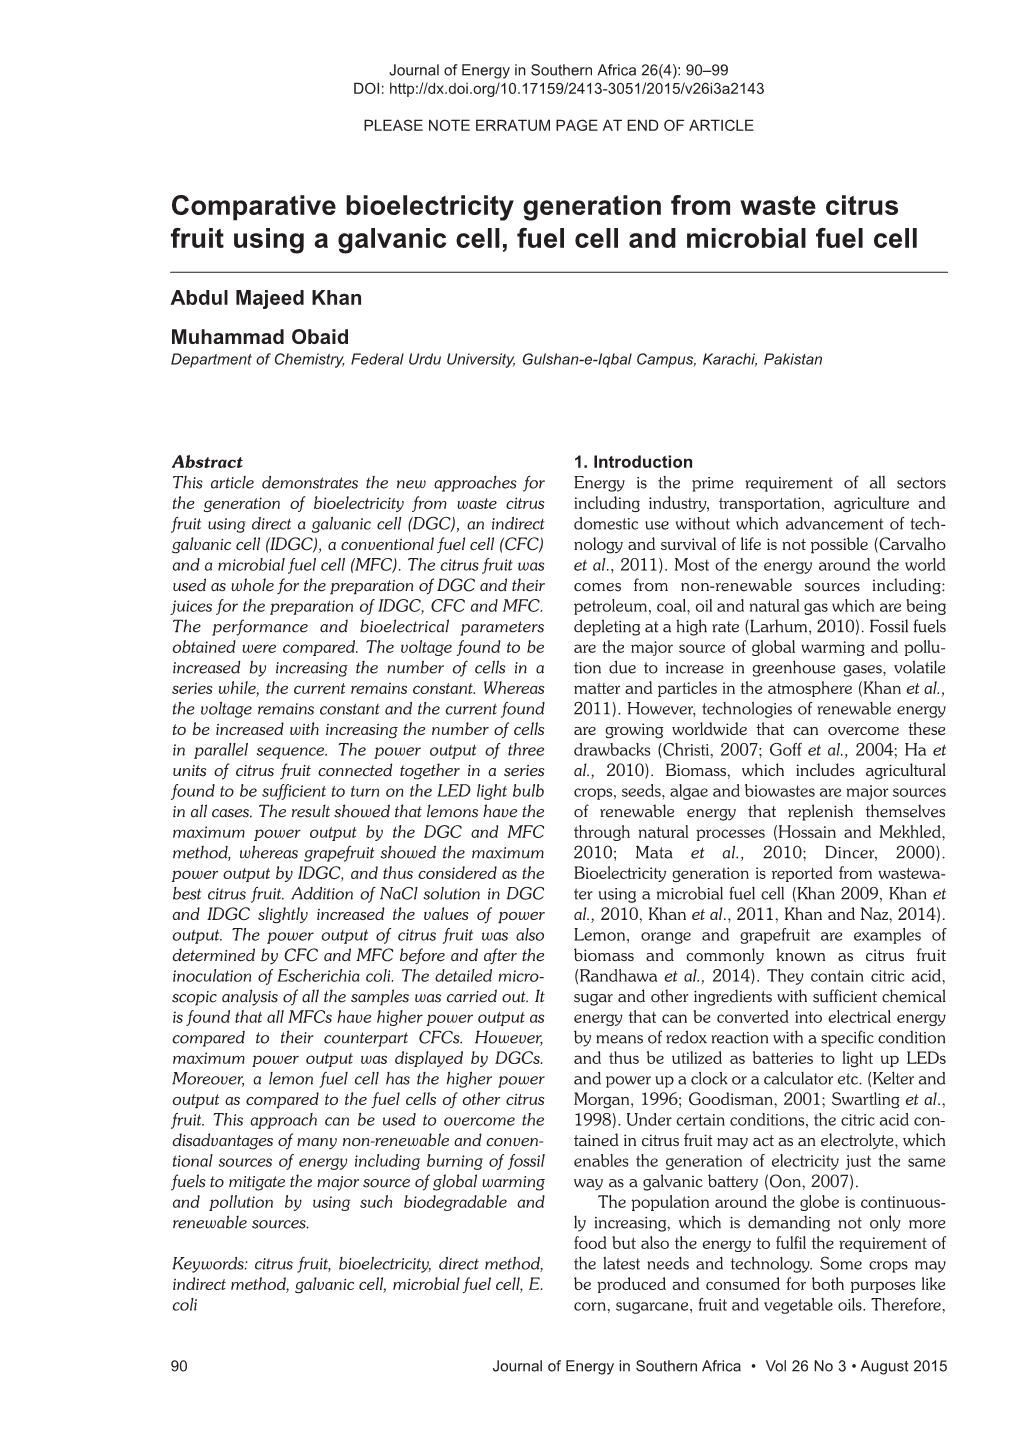 Comparative Bioelectricity Generation from Waste Citrus Fruit Using a Galvanic Cell, Fuel Cell and Microbial Fuel Cell